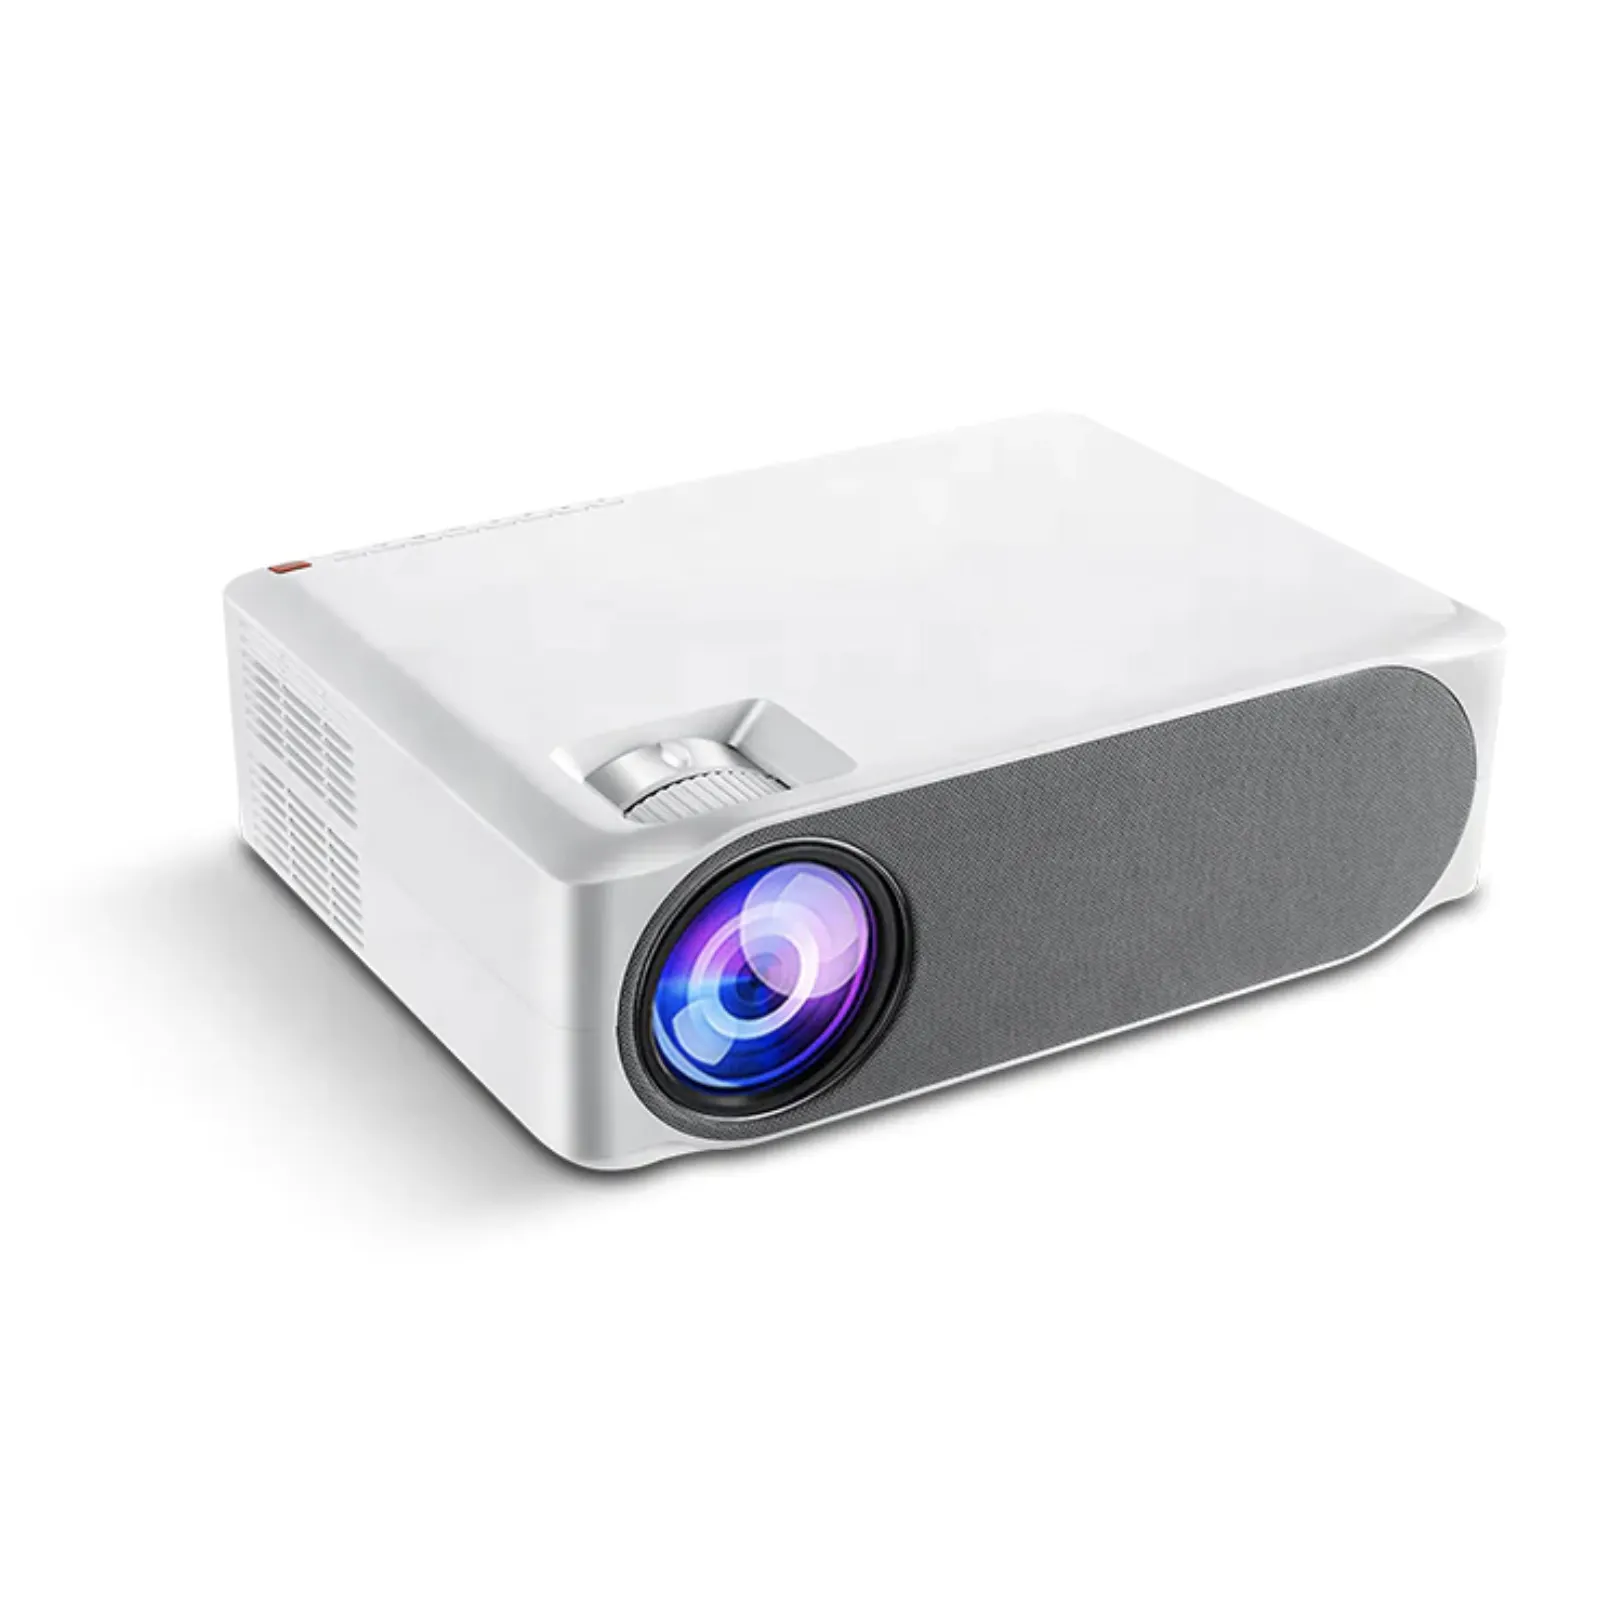 [No.1 Hot Selling 1080P Projector] Oem Odm Fabriek Fabricage 1080P Full Hd Led Lcd Draagbare Video Home Theater Projector